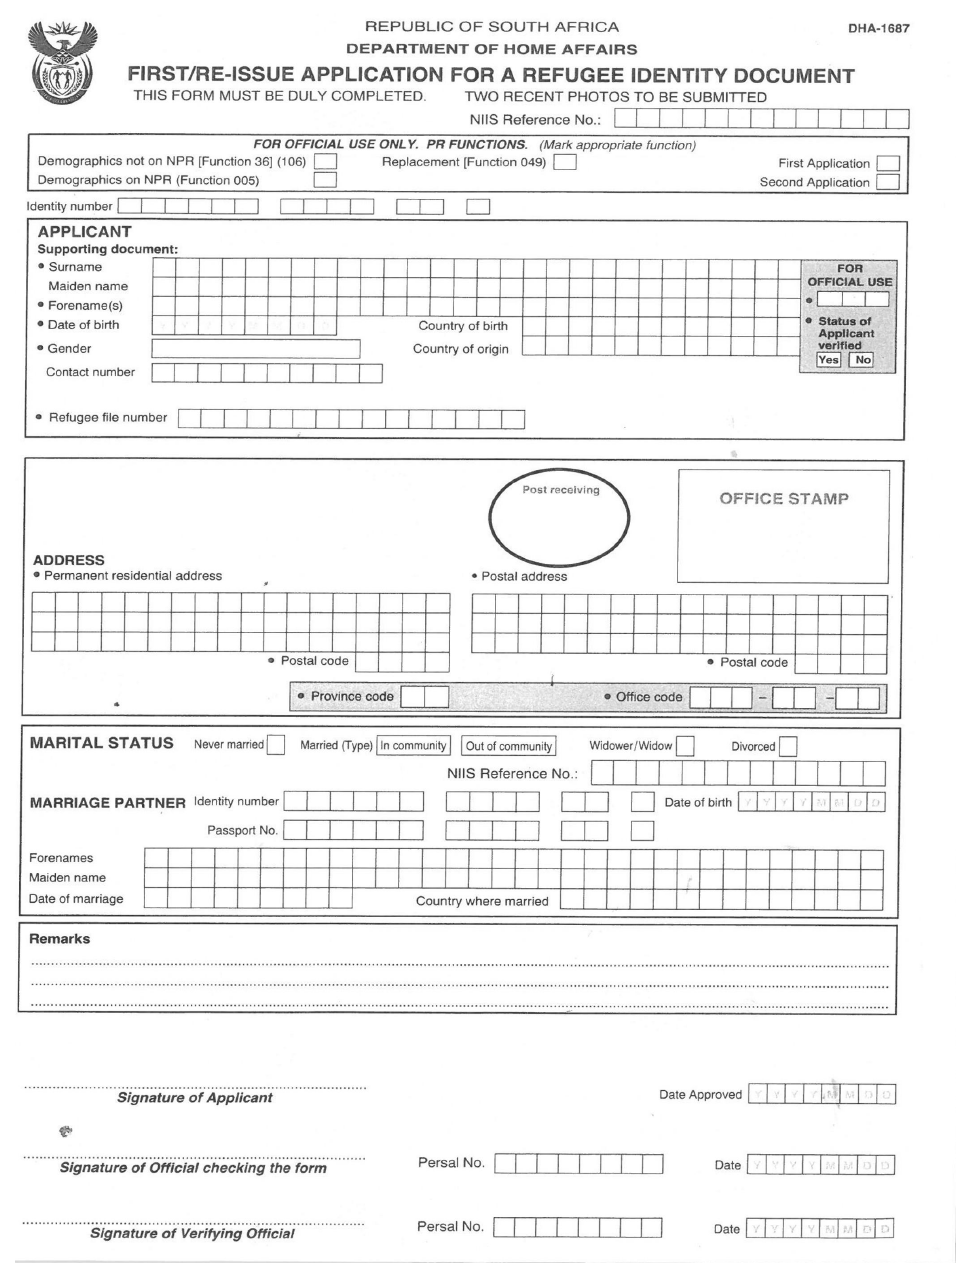 Form 11 Application for Refugee Identity Document DHA 1687